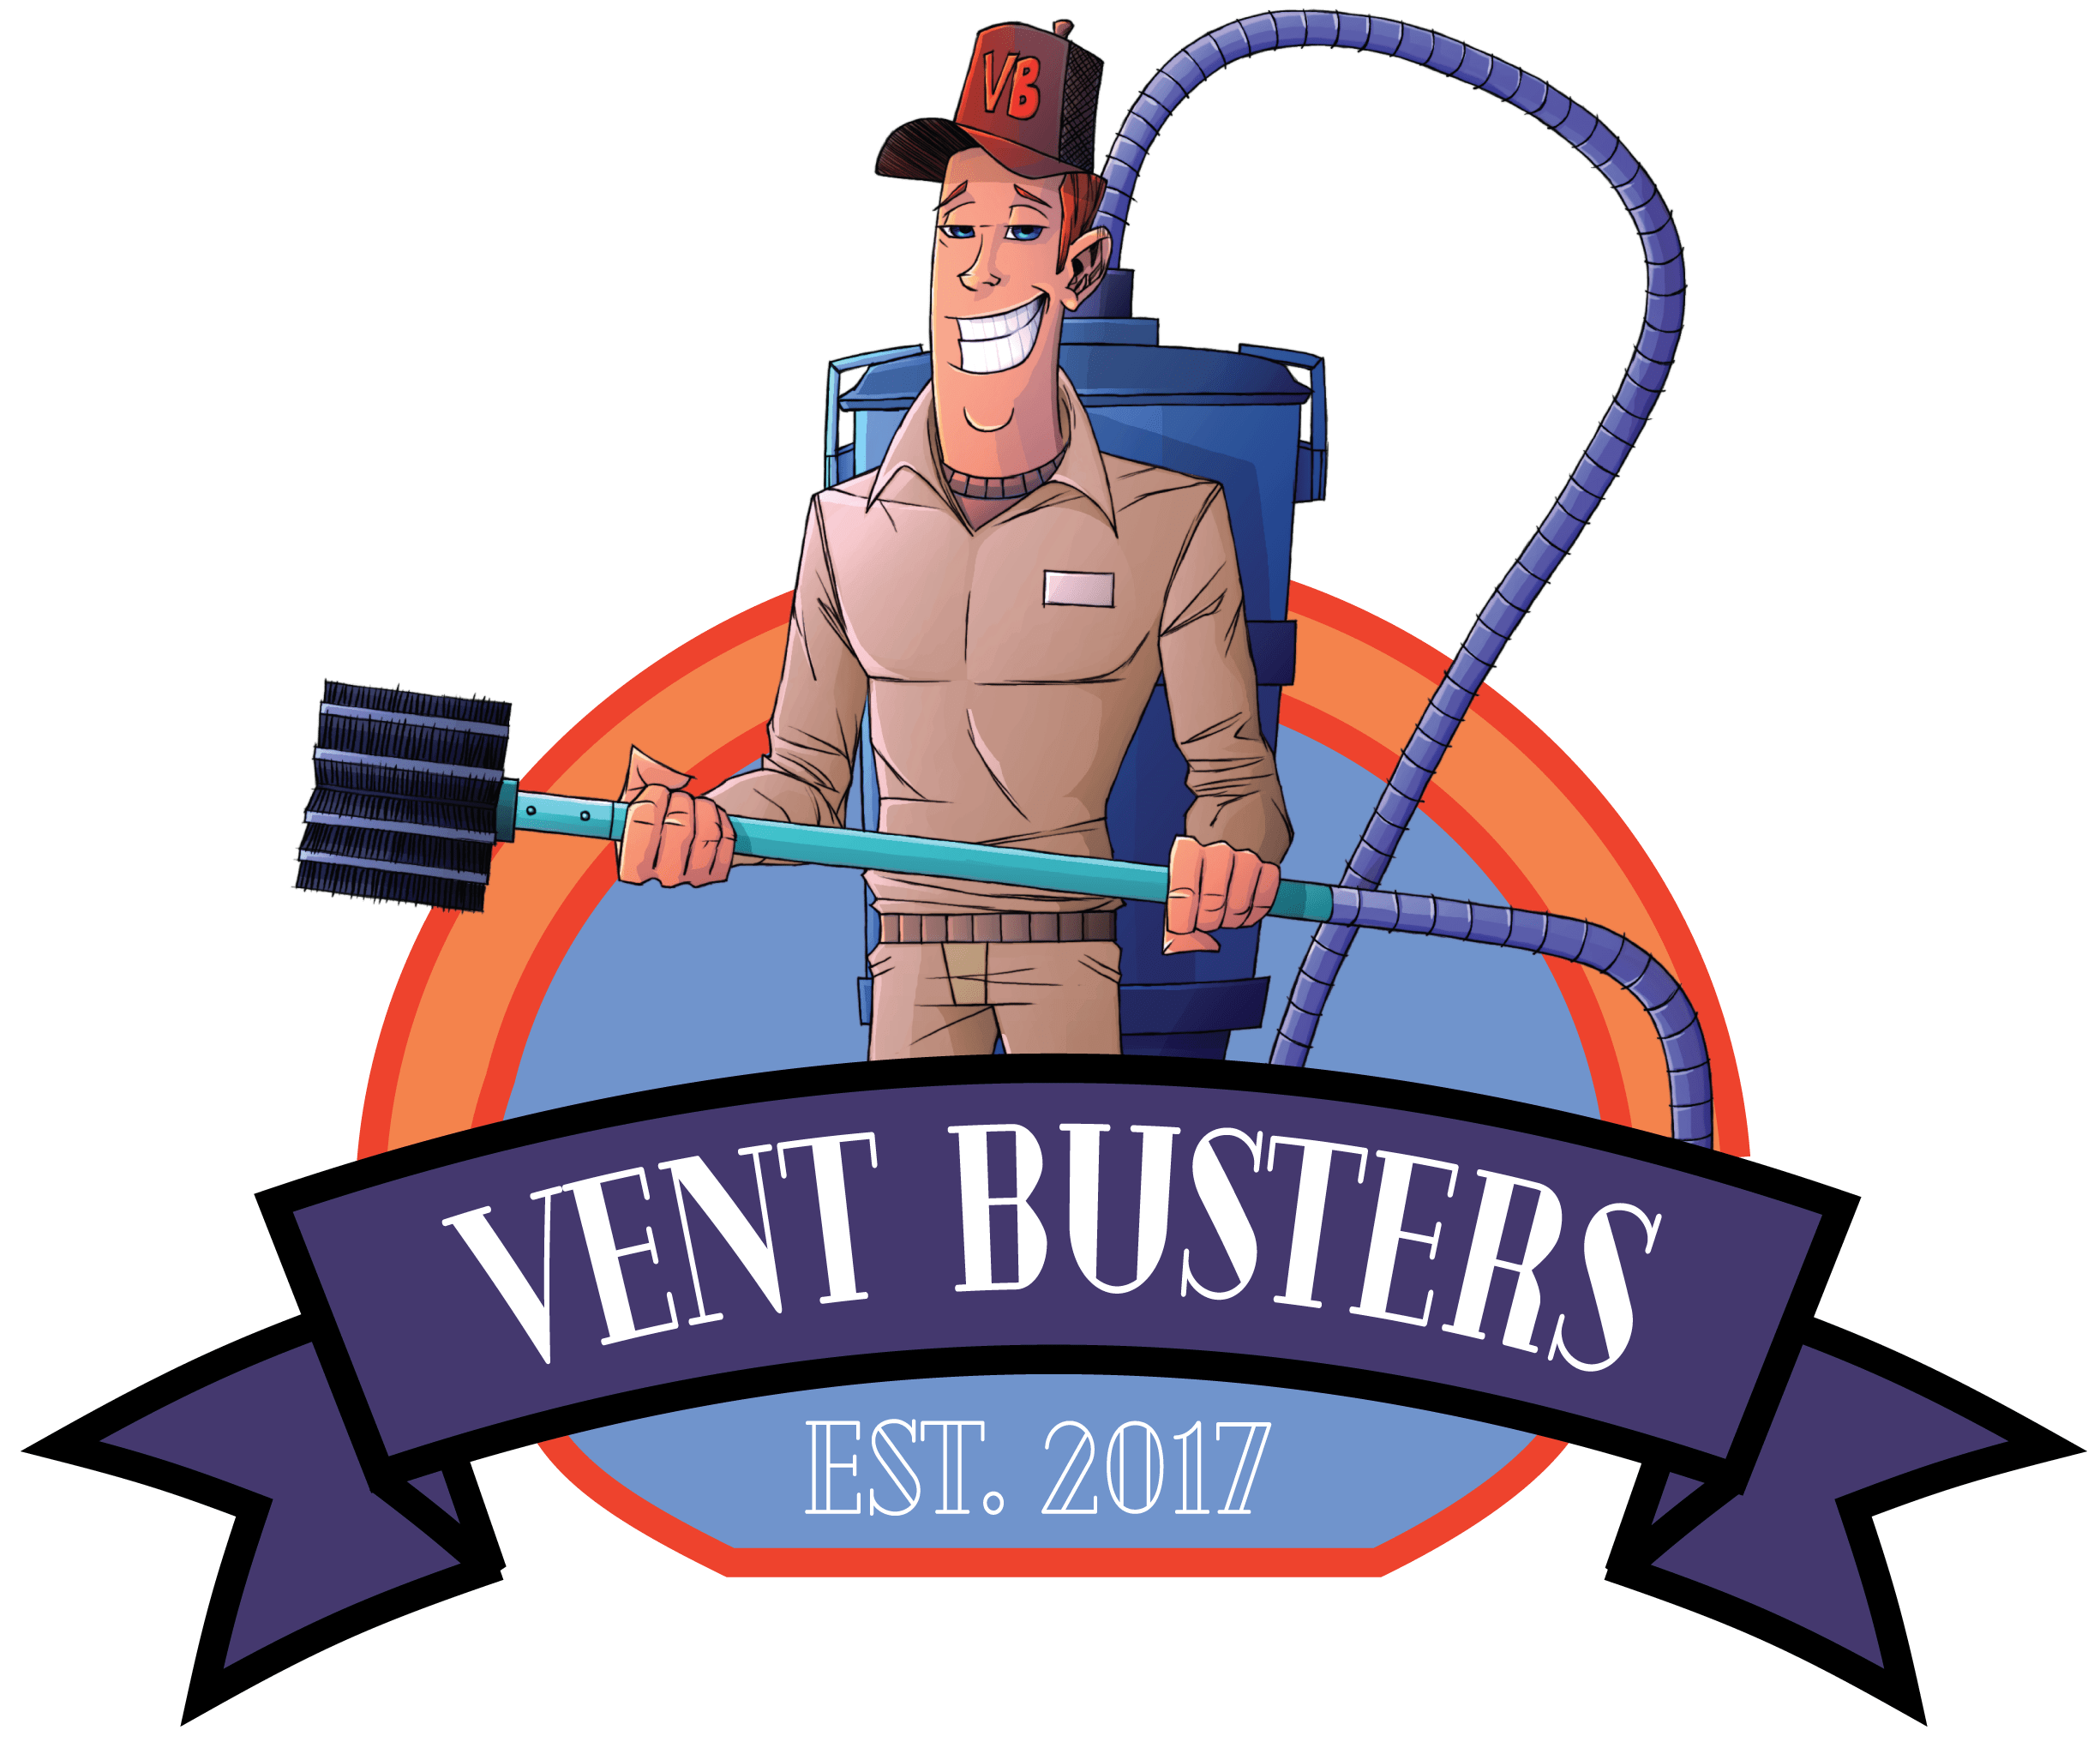 Vent Busters Logo